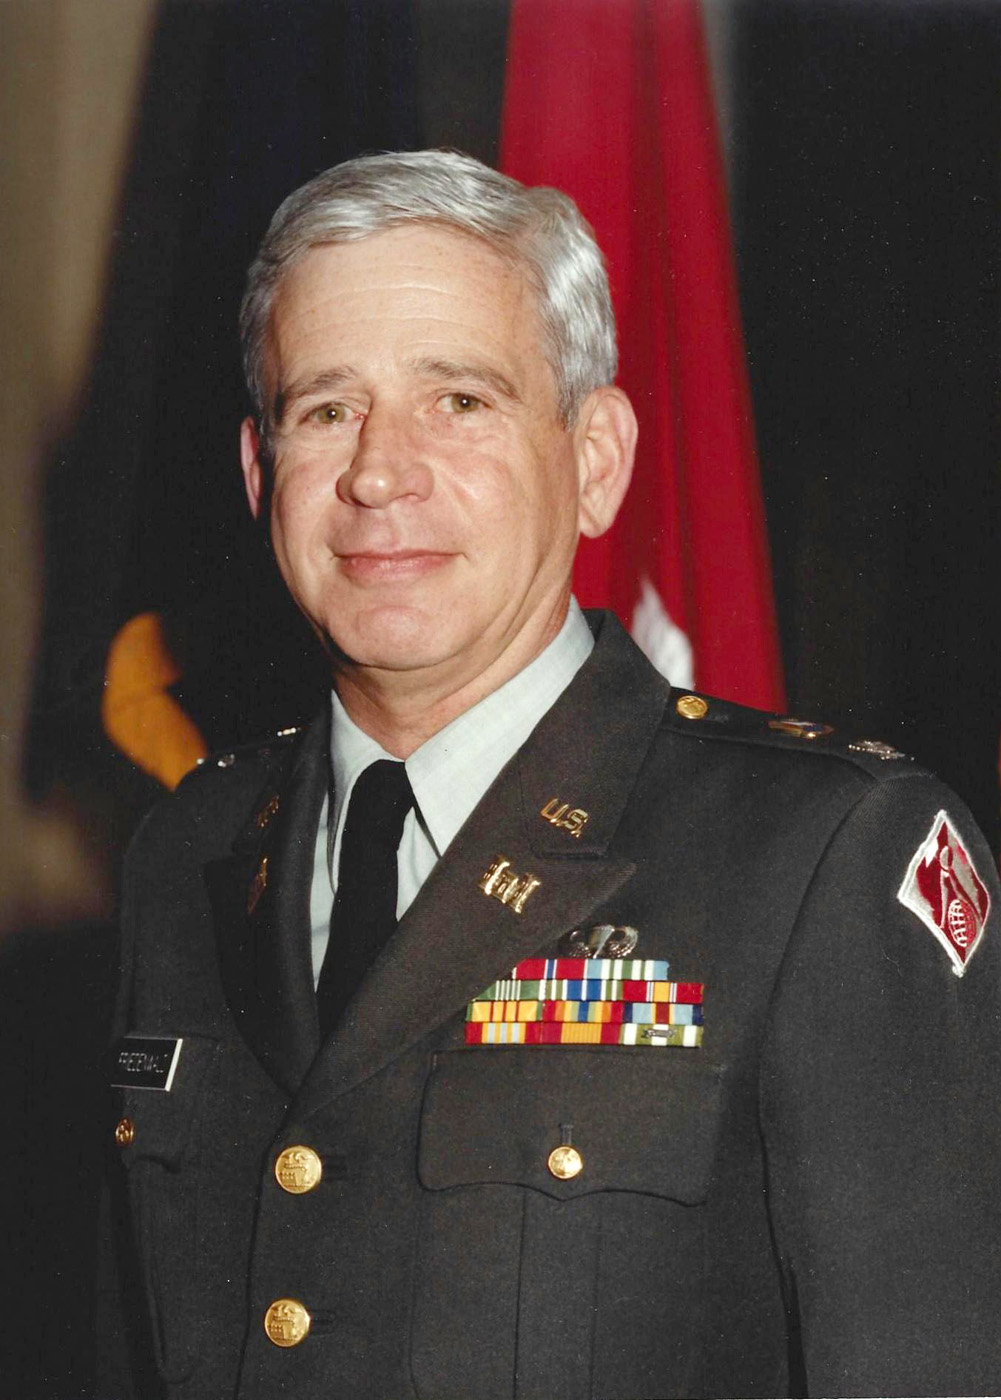 Riveridge: Vancouver resident and retired Army Col. Bob Friedenwald died from lung cancer on July 31 at age 77.